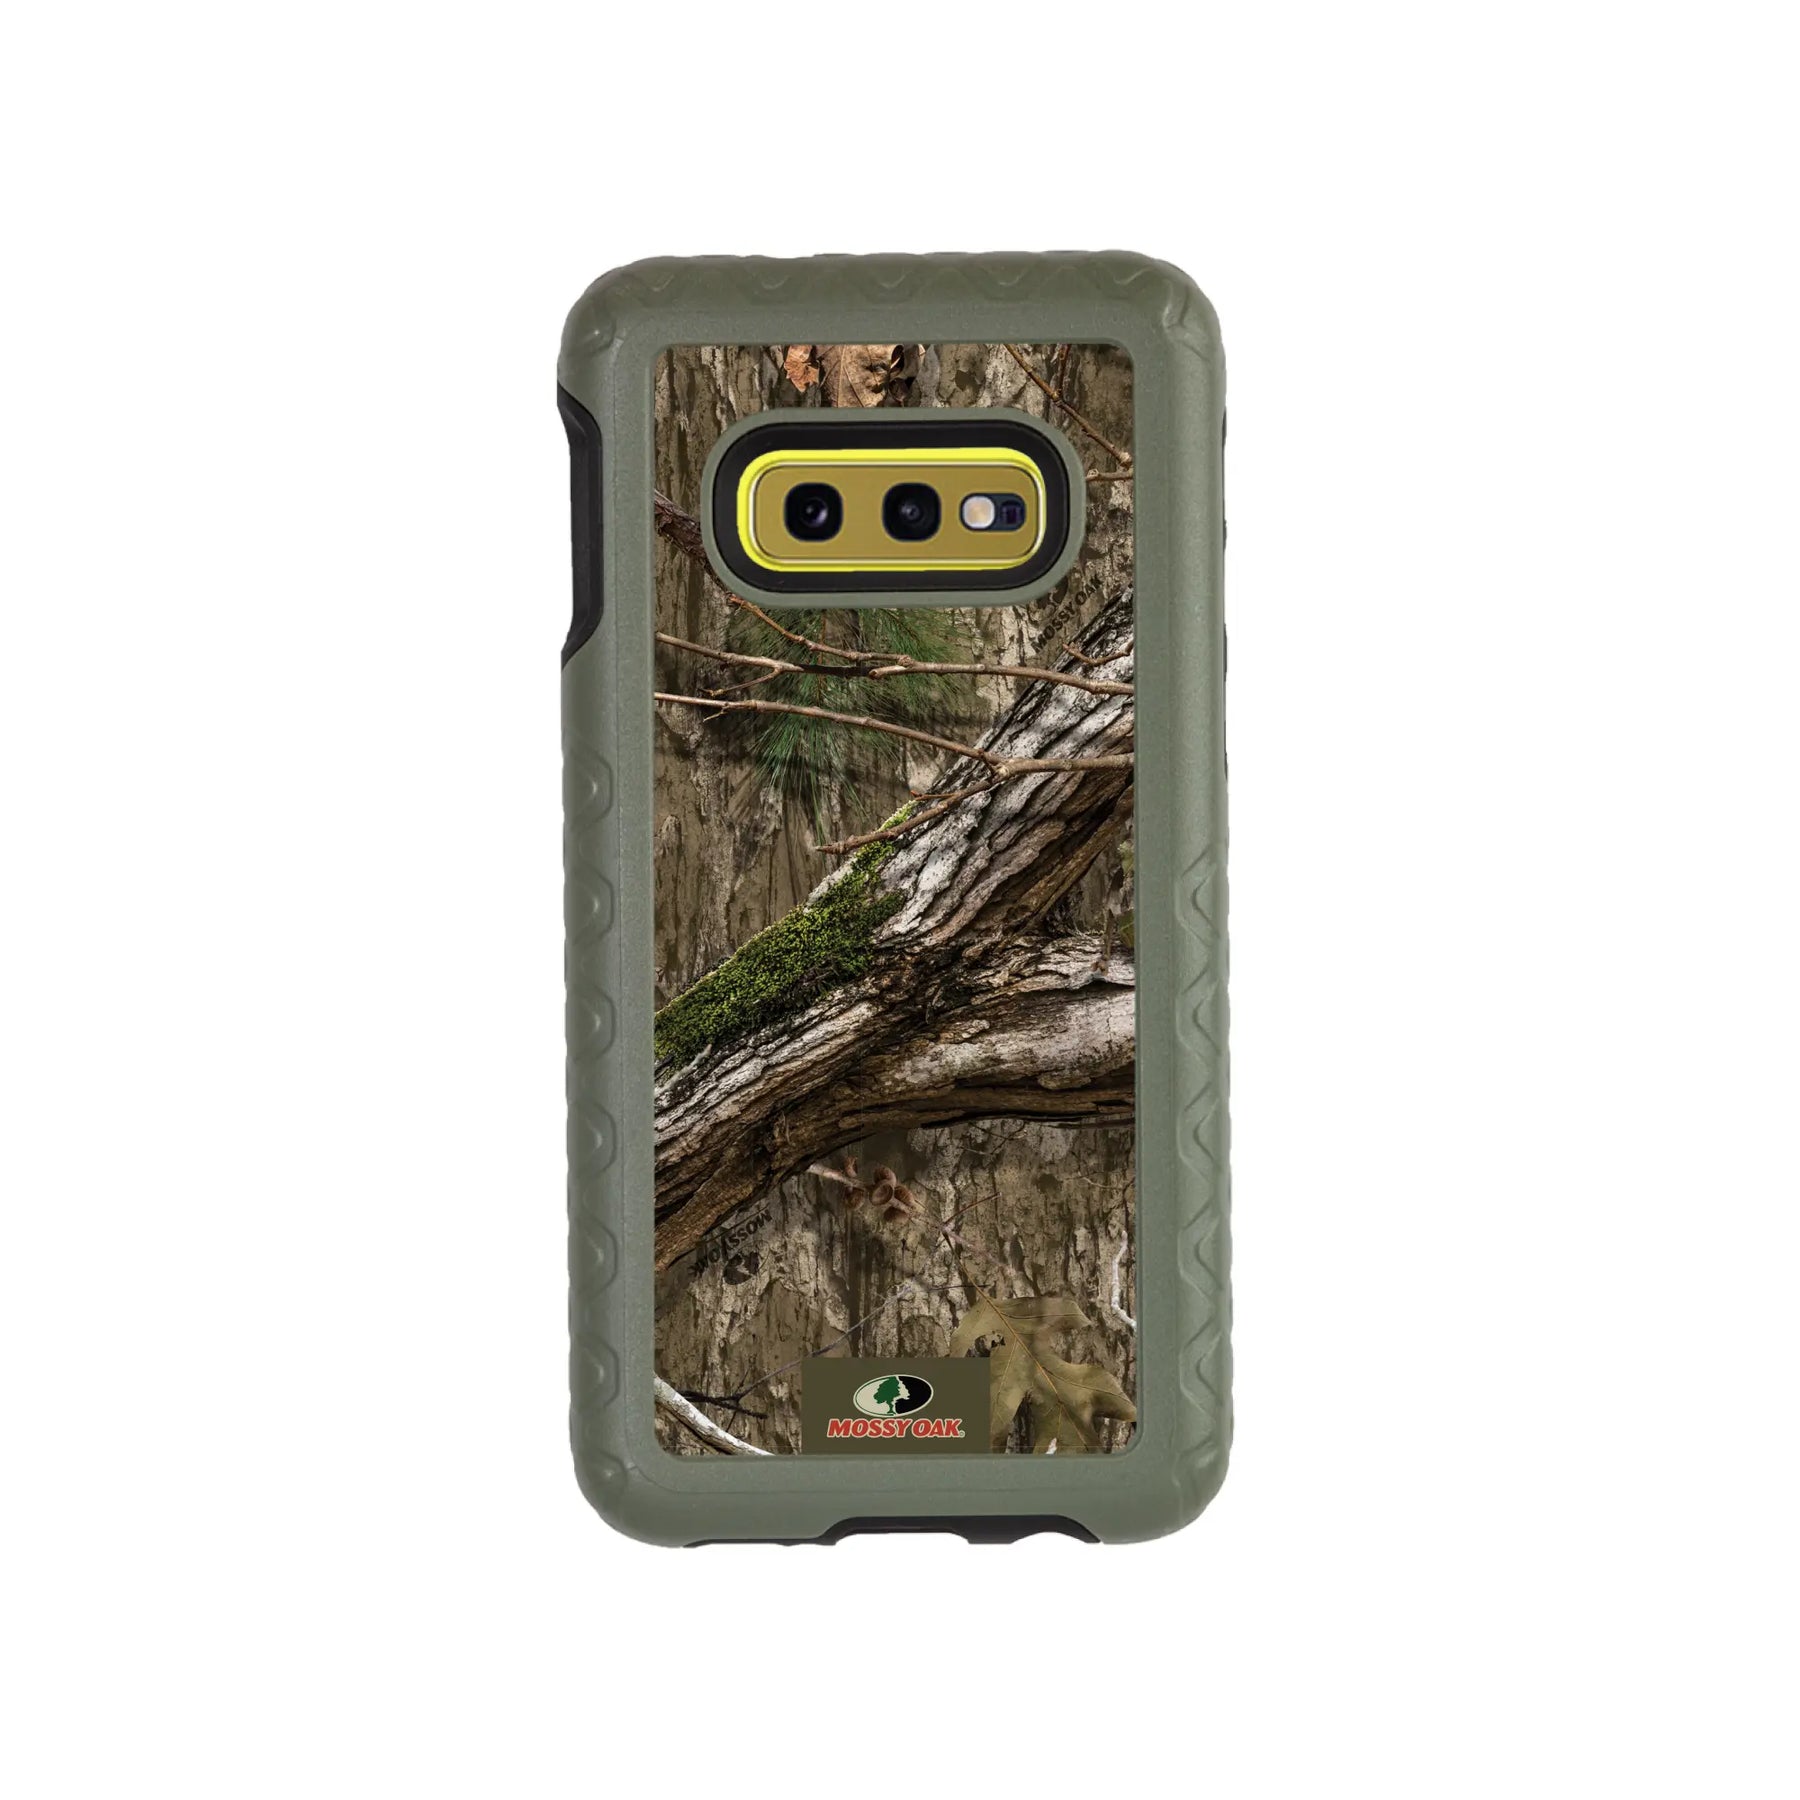 Mossy Oak Fortitude Series for Samsung Galaxy S10e - Country DNA - Custom Case - OliveDrabGreen - cellhelmet